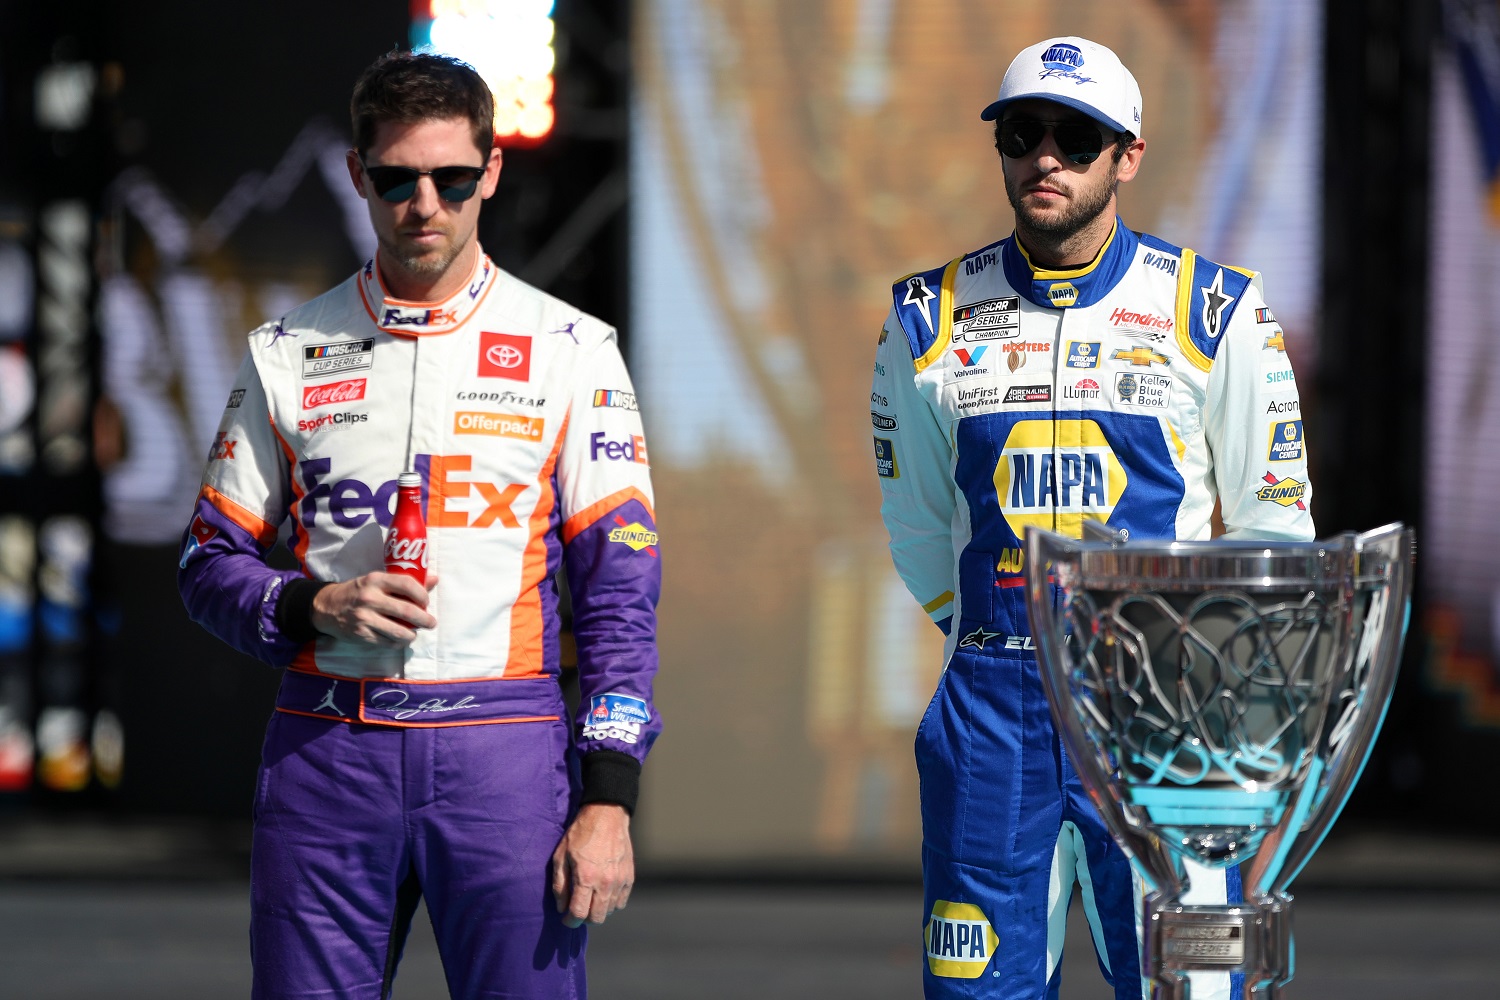 NASCAR Cup Series Championship 4 drivers Denny Hamlin and Chase Elliott during pre-race ceremonies at the NASCAR Cup Series Championship at Phoenix Raceway on Nov. 7, 2021.